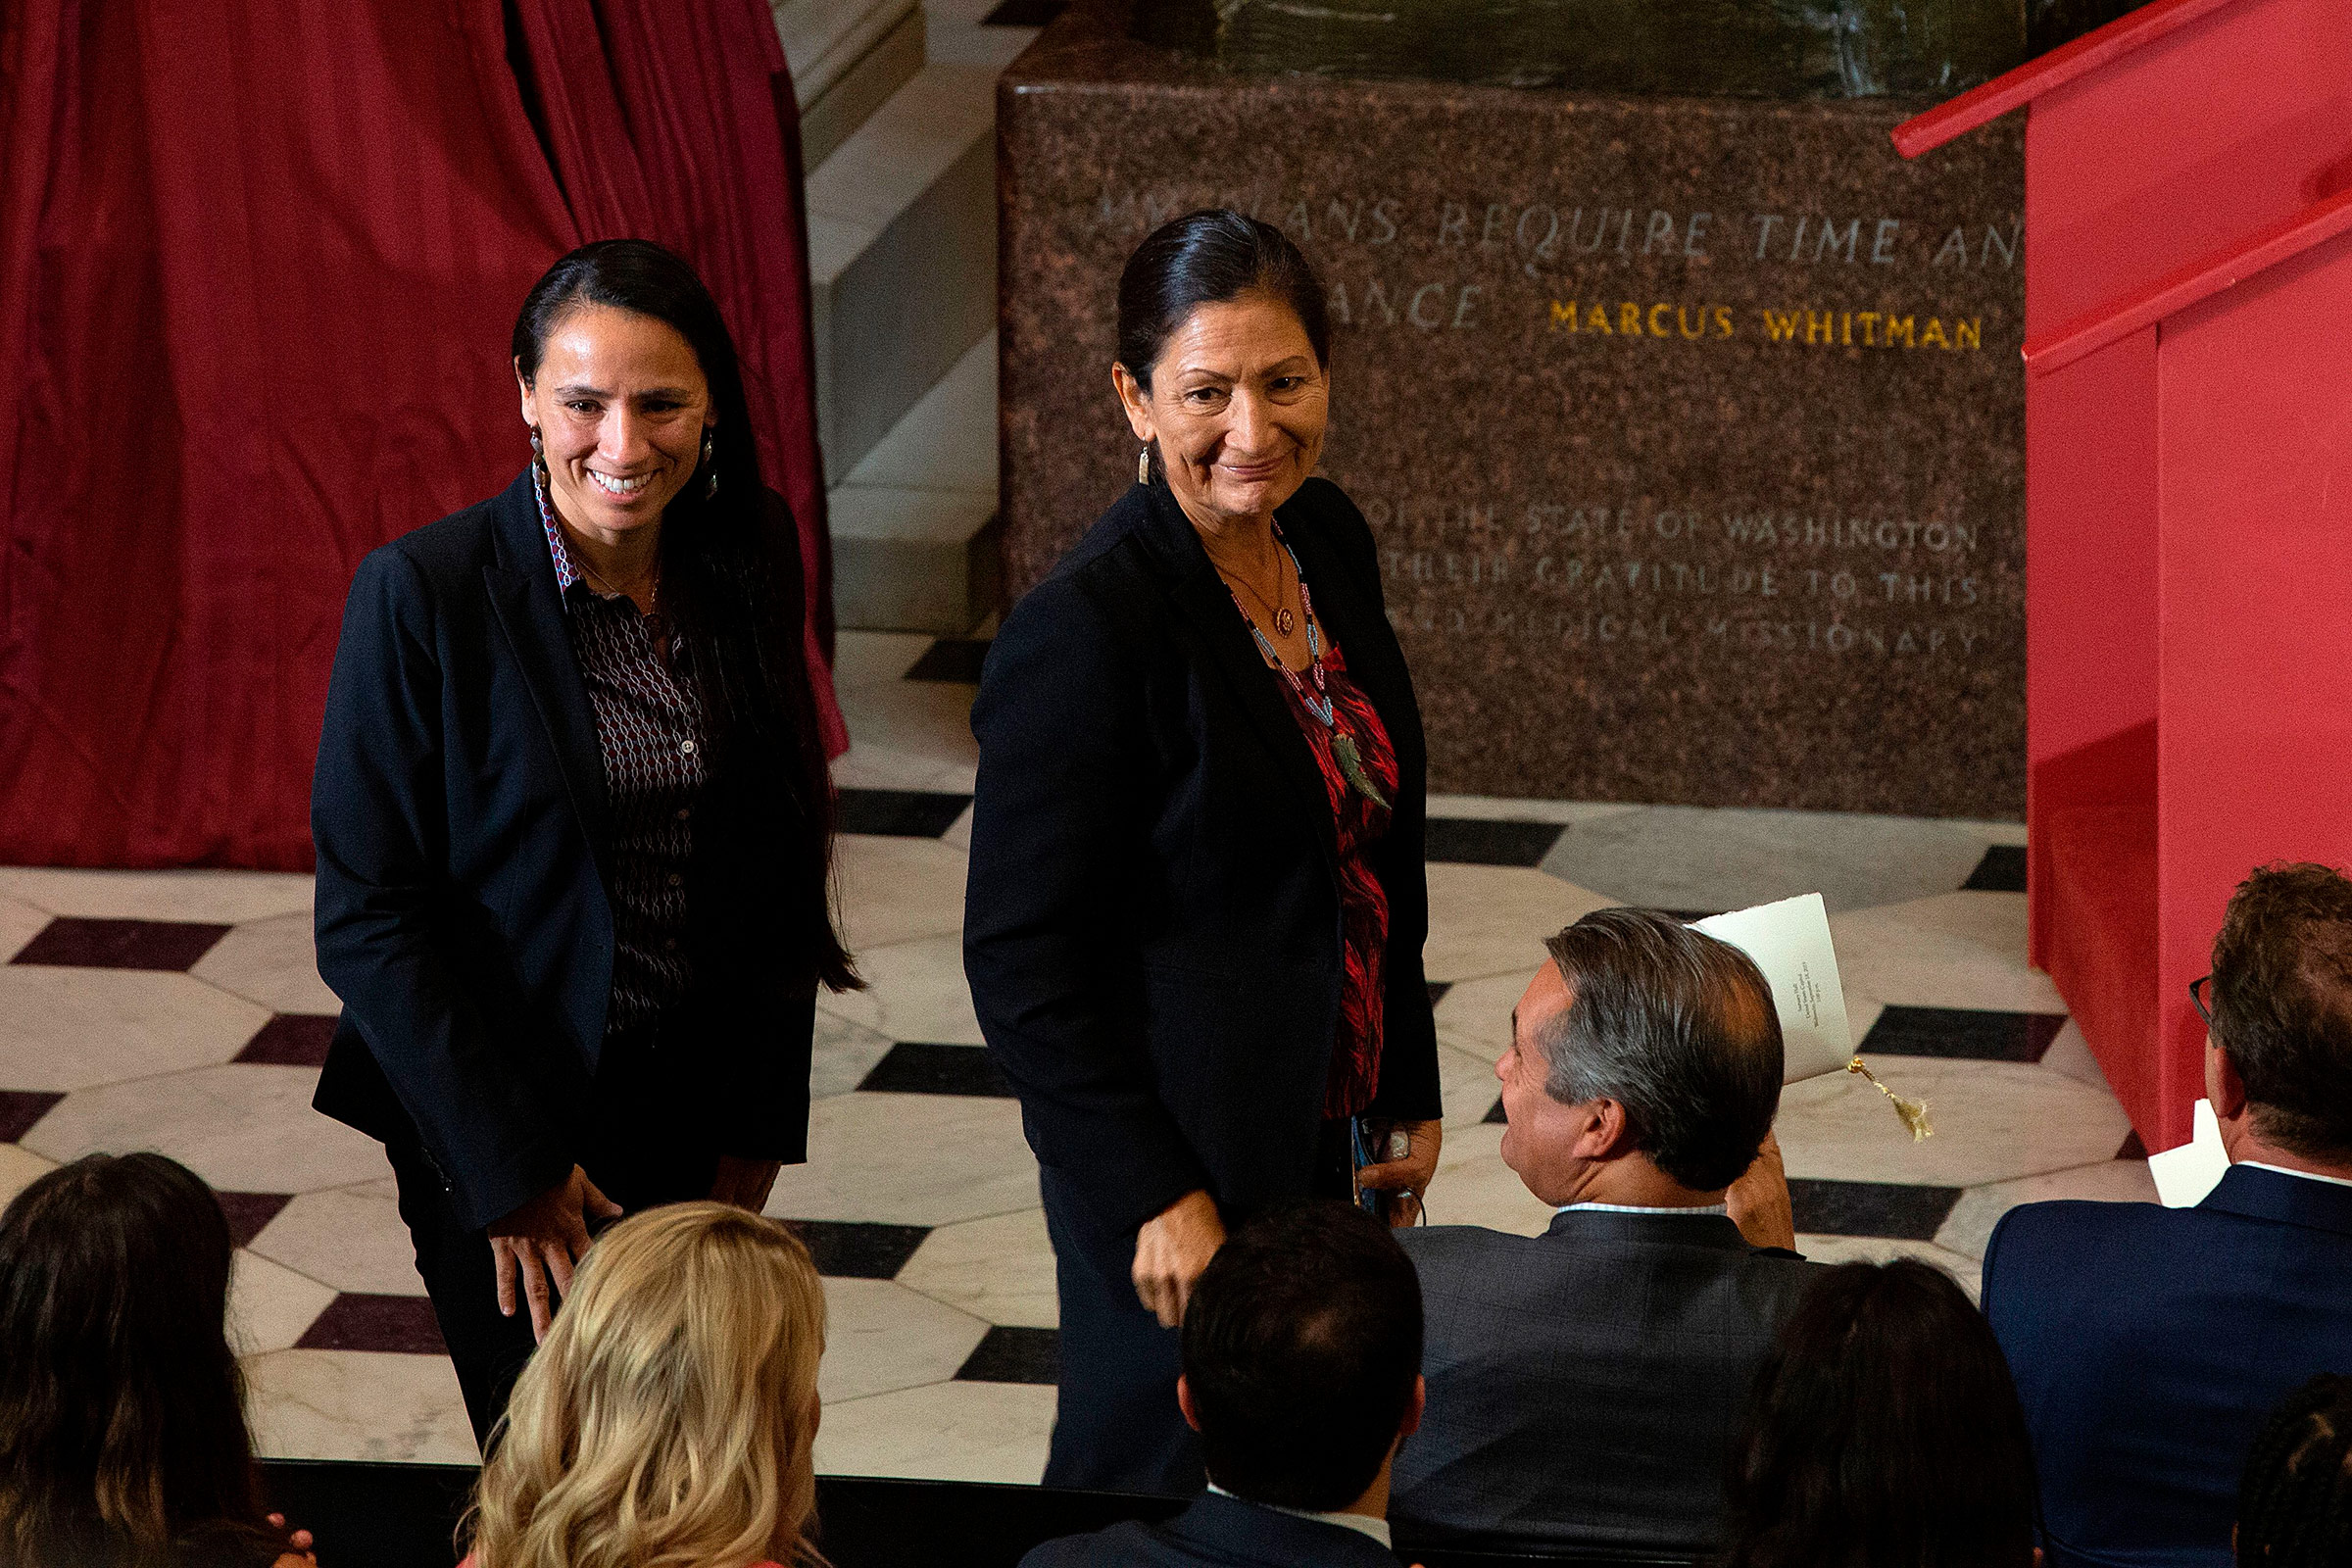 U.S. Representatives Sharice Davids, left, and Deb Haaland are recognized as the first Native American women elected to Congress during a dedication and unveiling ceremony for a statue of Ponca Chief Standing Bear of Nebraska on Capitol Hill in Washington, DC, on Sept. 18, 2019.